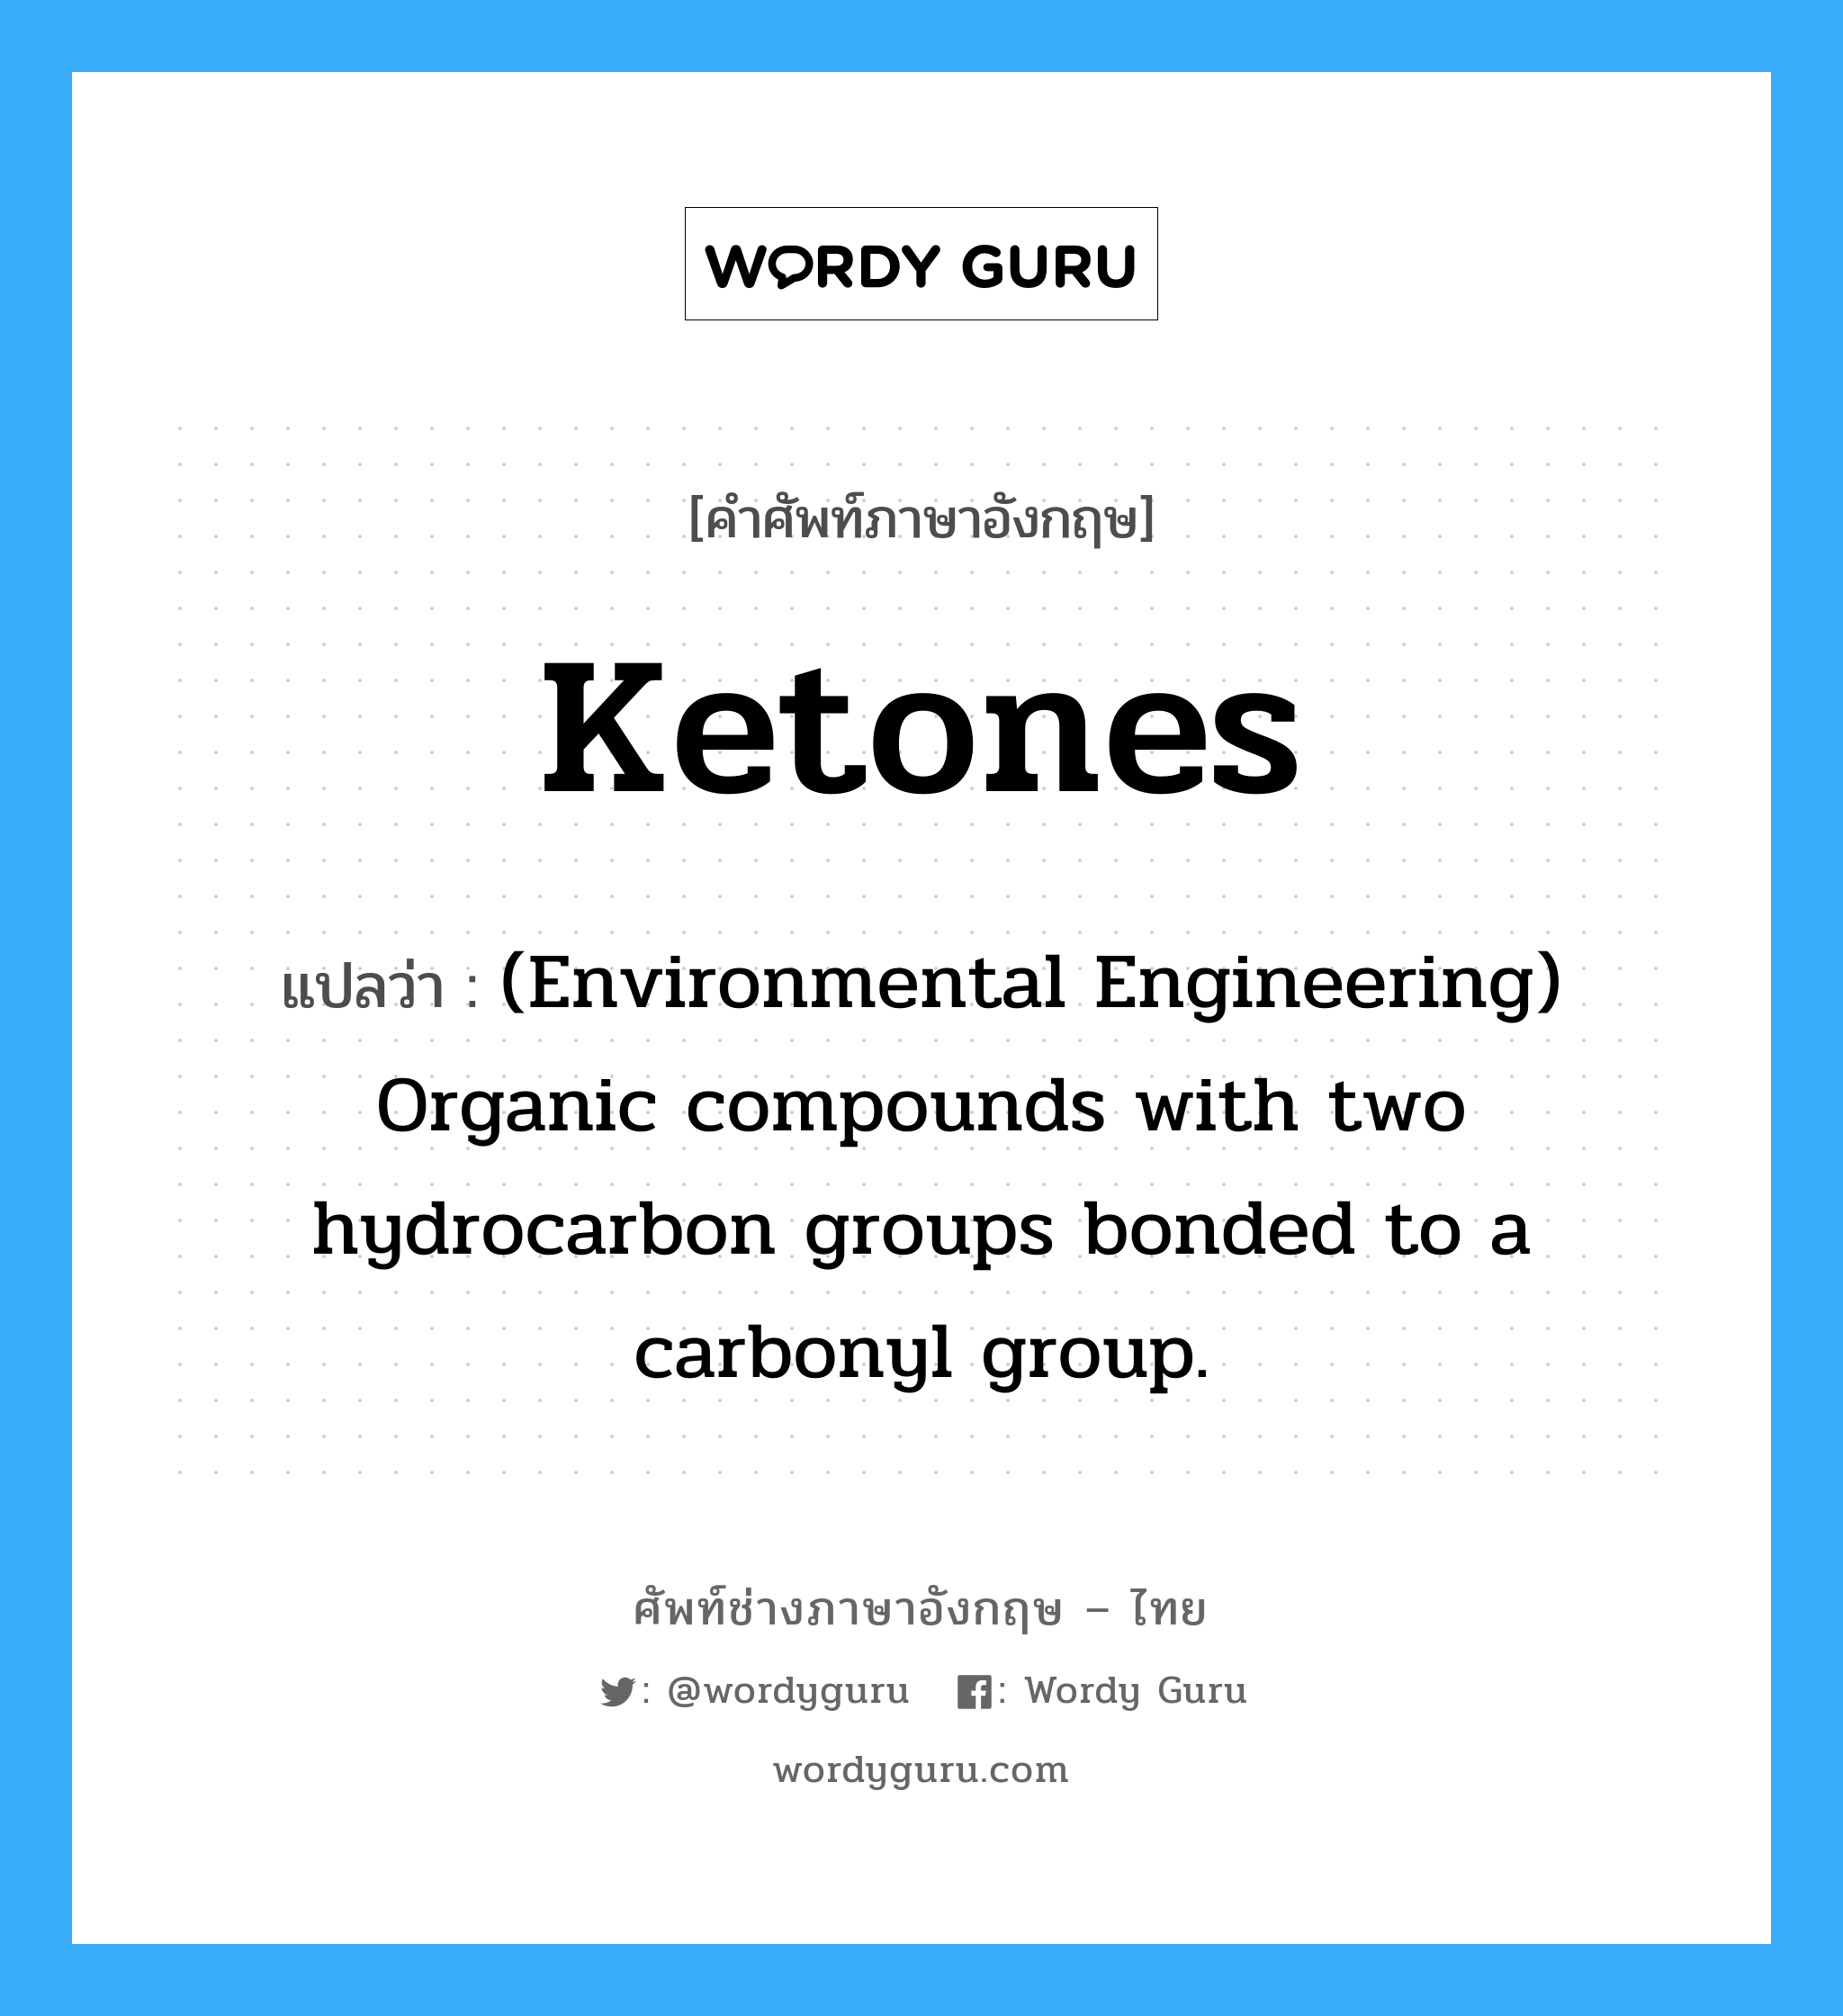 Ketones แปลว่า?, คำศัพท์ช่างภาษาอังกฤษ - ไทย Ketones คำศัพท์ภาษาอังกฤษ Ketones แปลว่า (Environmental Engineering) Organic compounds with two hydrocarbon groups bonded to a carbonyl group.